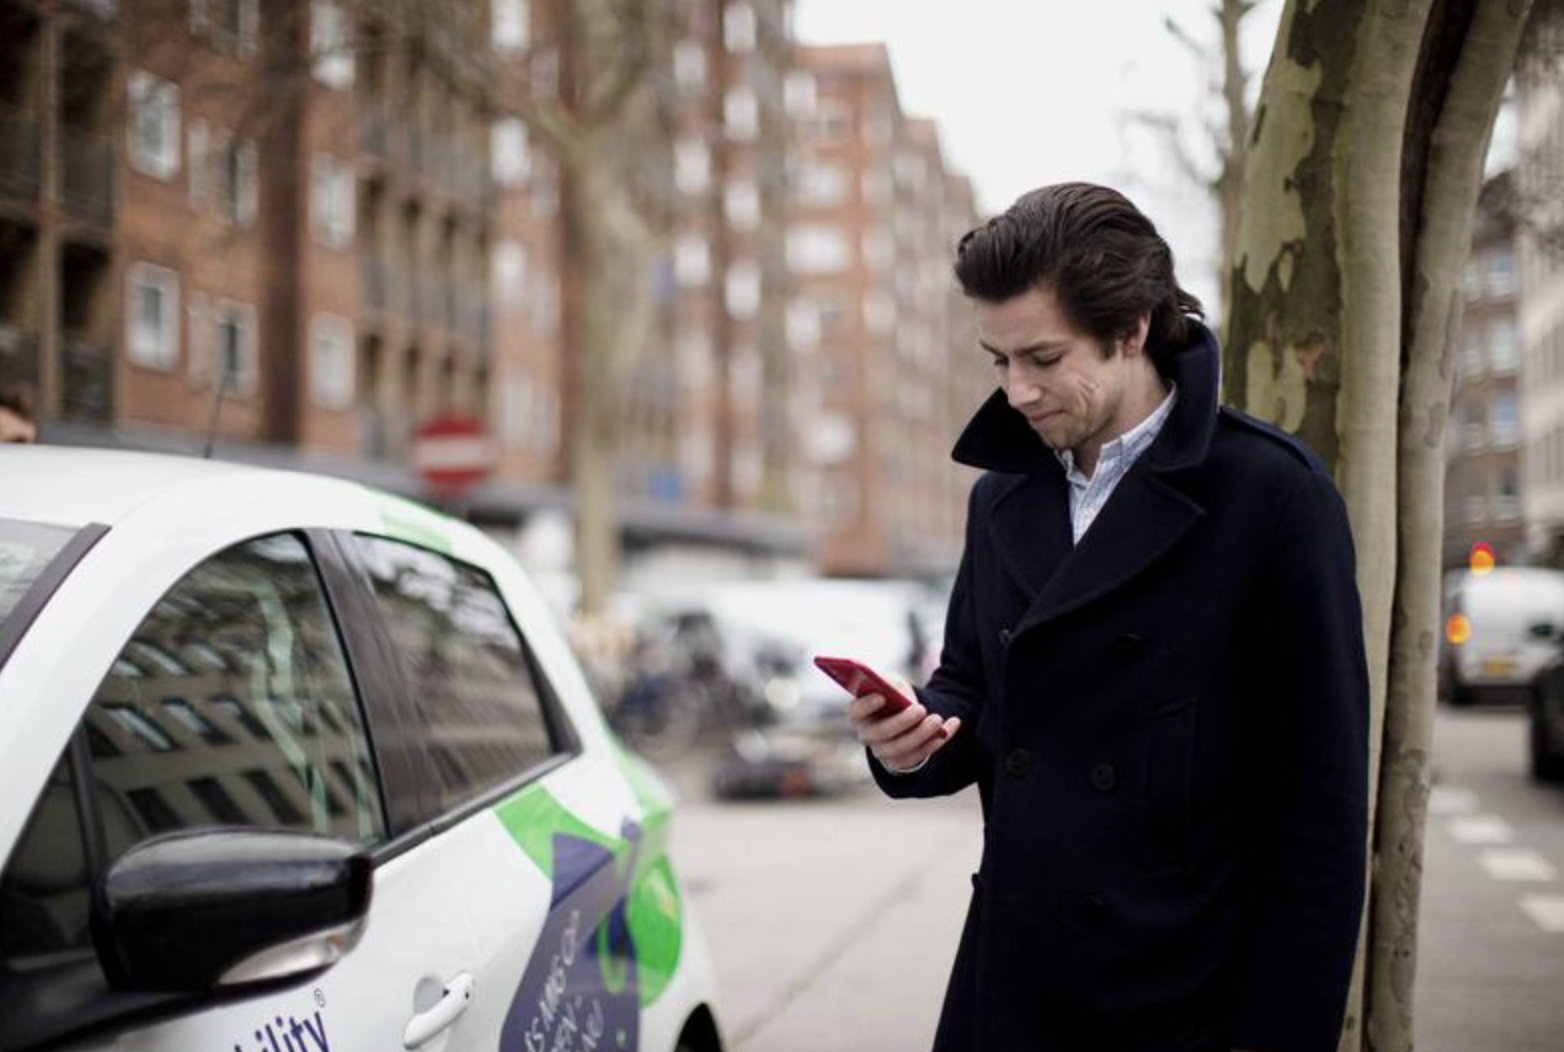 A caucasian male person holding a mobile device next to eCar.